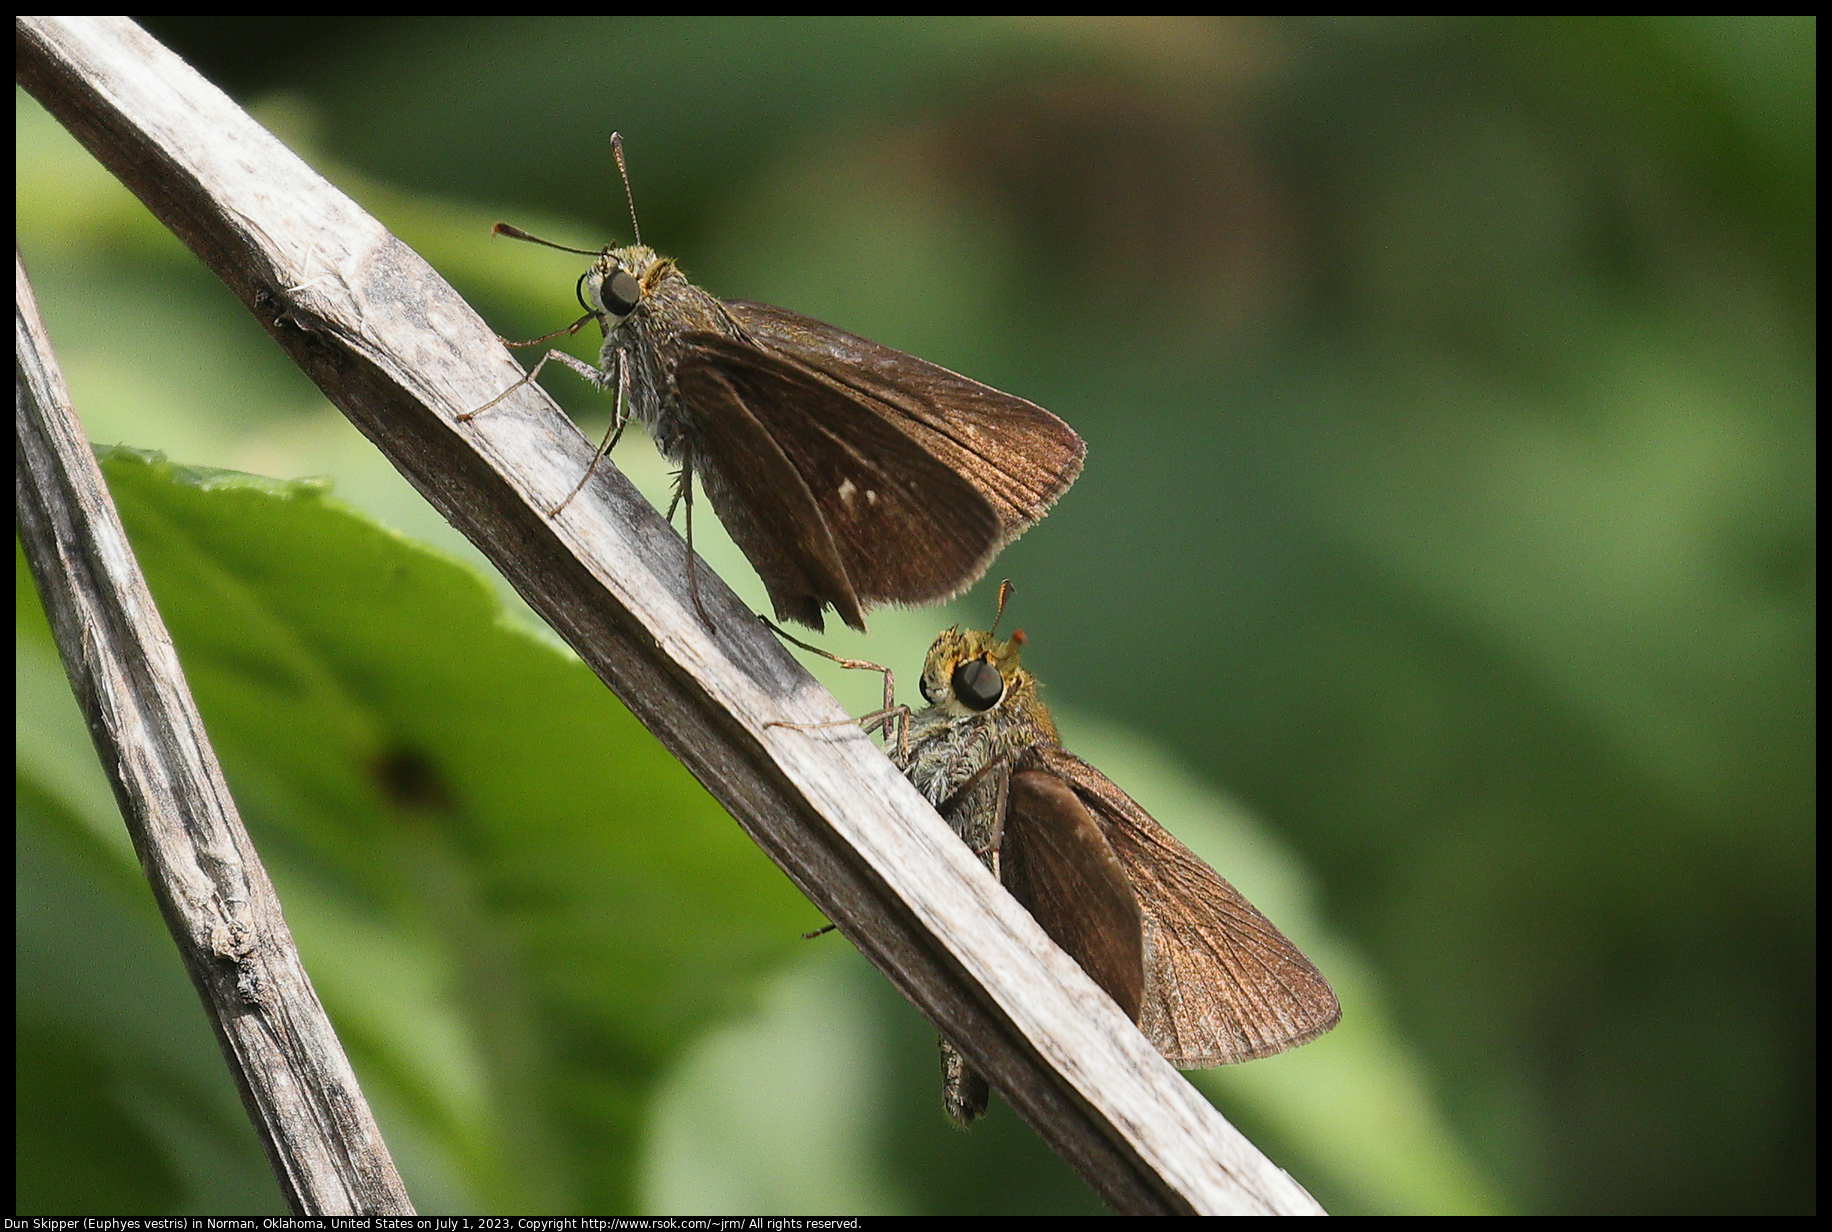 Dun Skipper (Euphyes vestris) in Norman, Oklahoma, United States on July 1, 2023